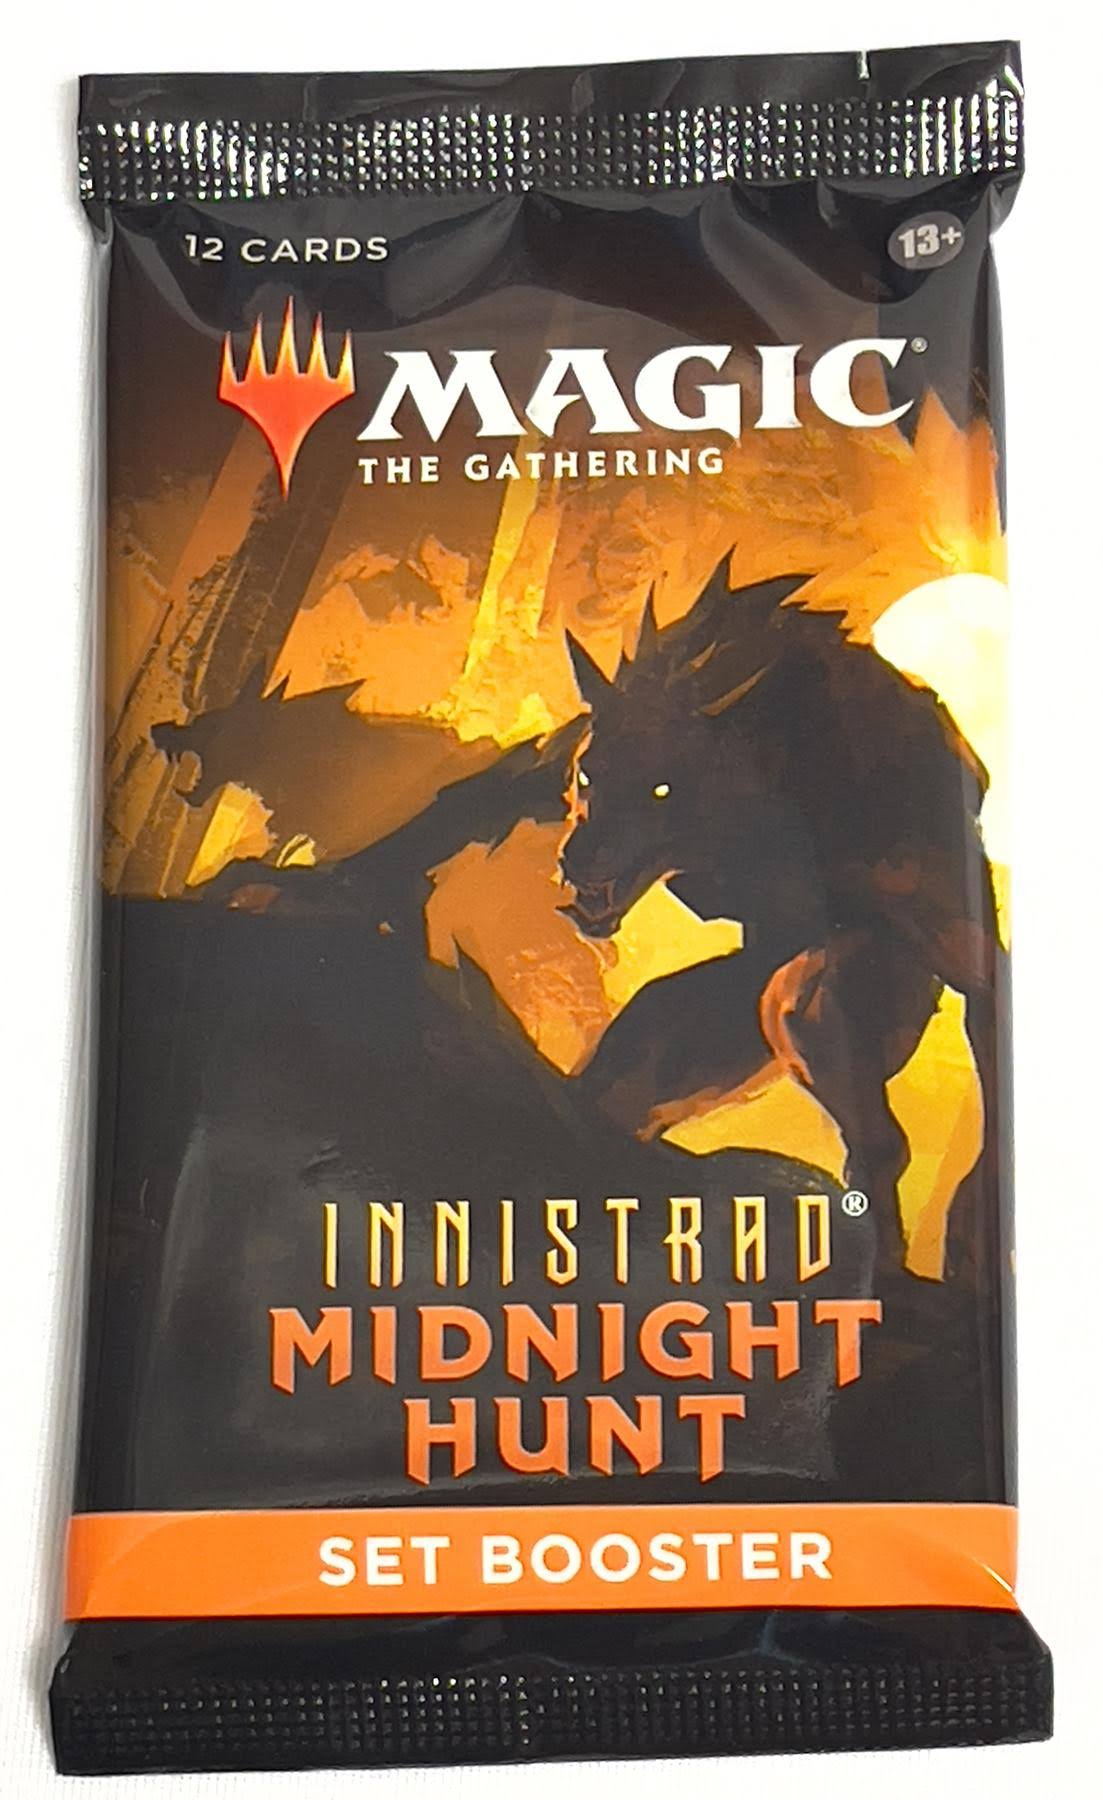 Magic The Gathering - Innistrad Midnight Hunt - Set Booster Pack